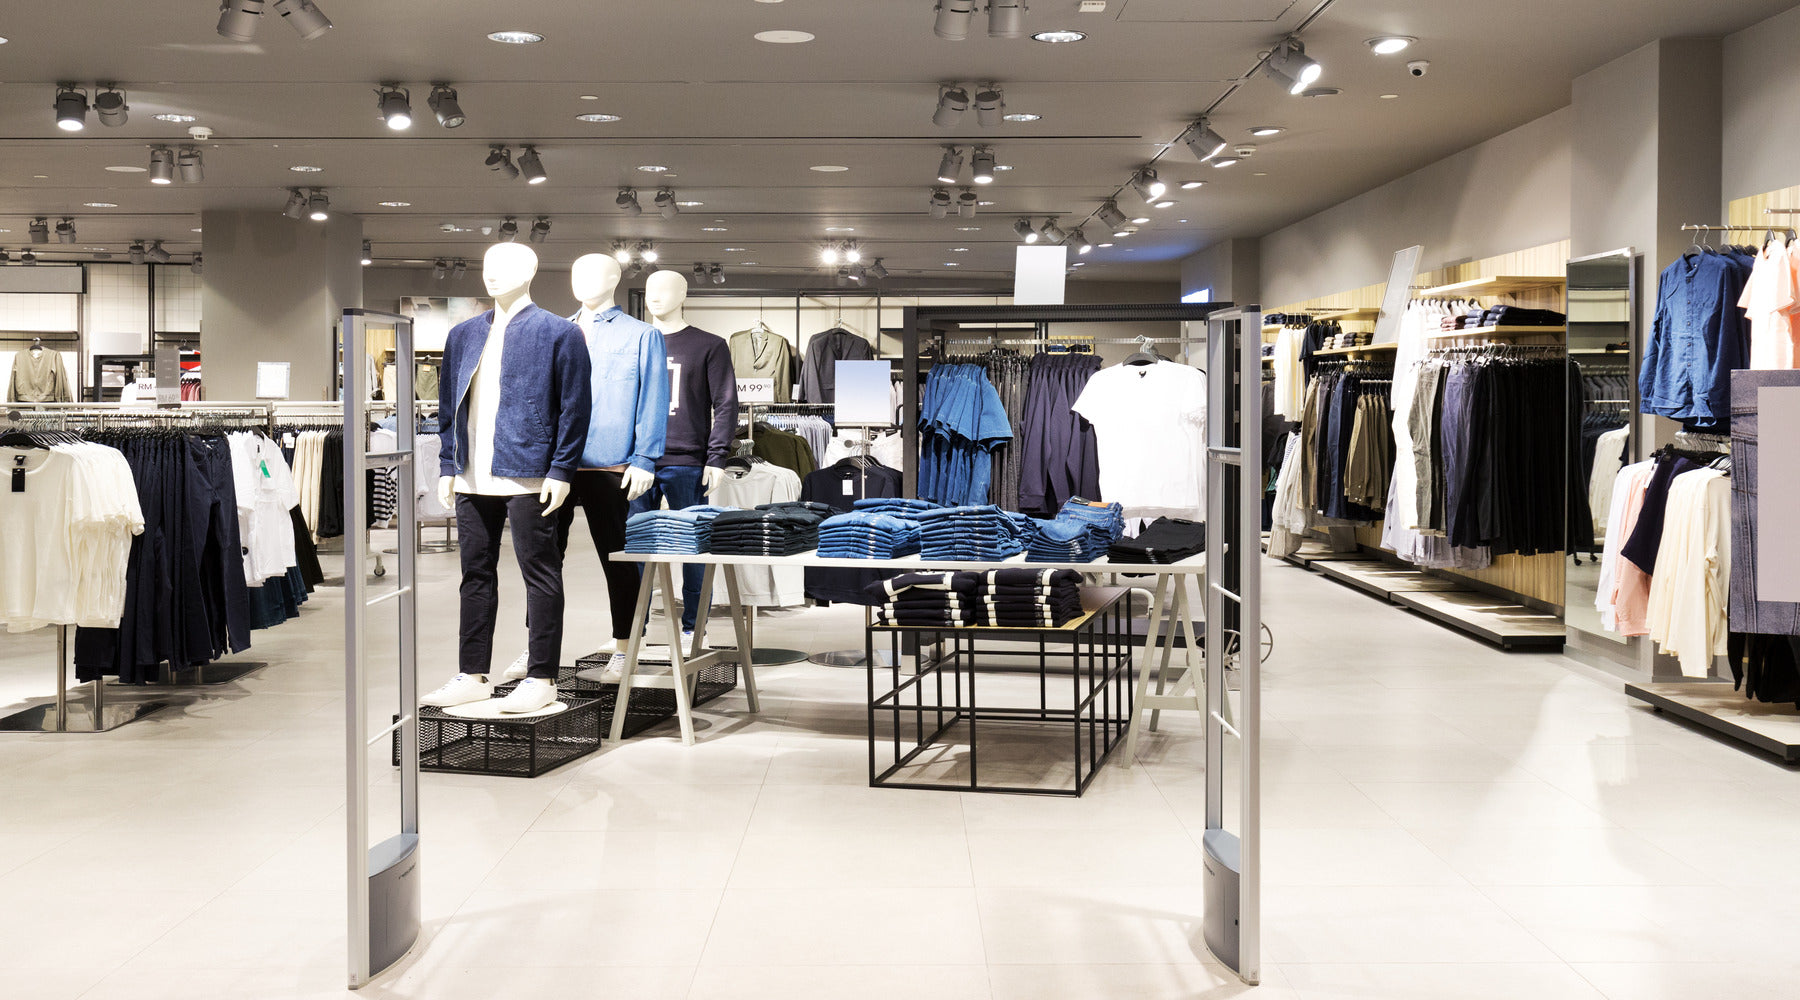 BR30 LED bulbs used in track lighting located in interior of modern fashion shop